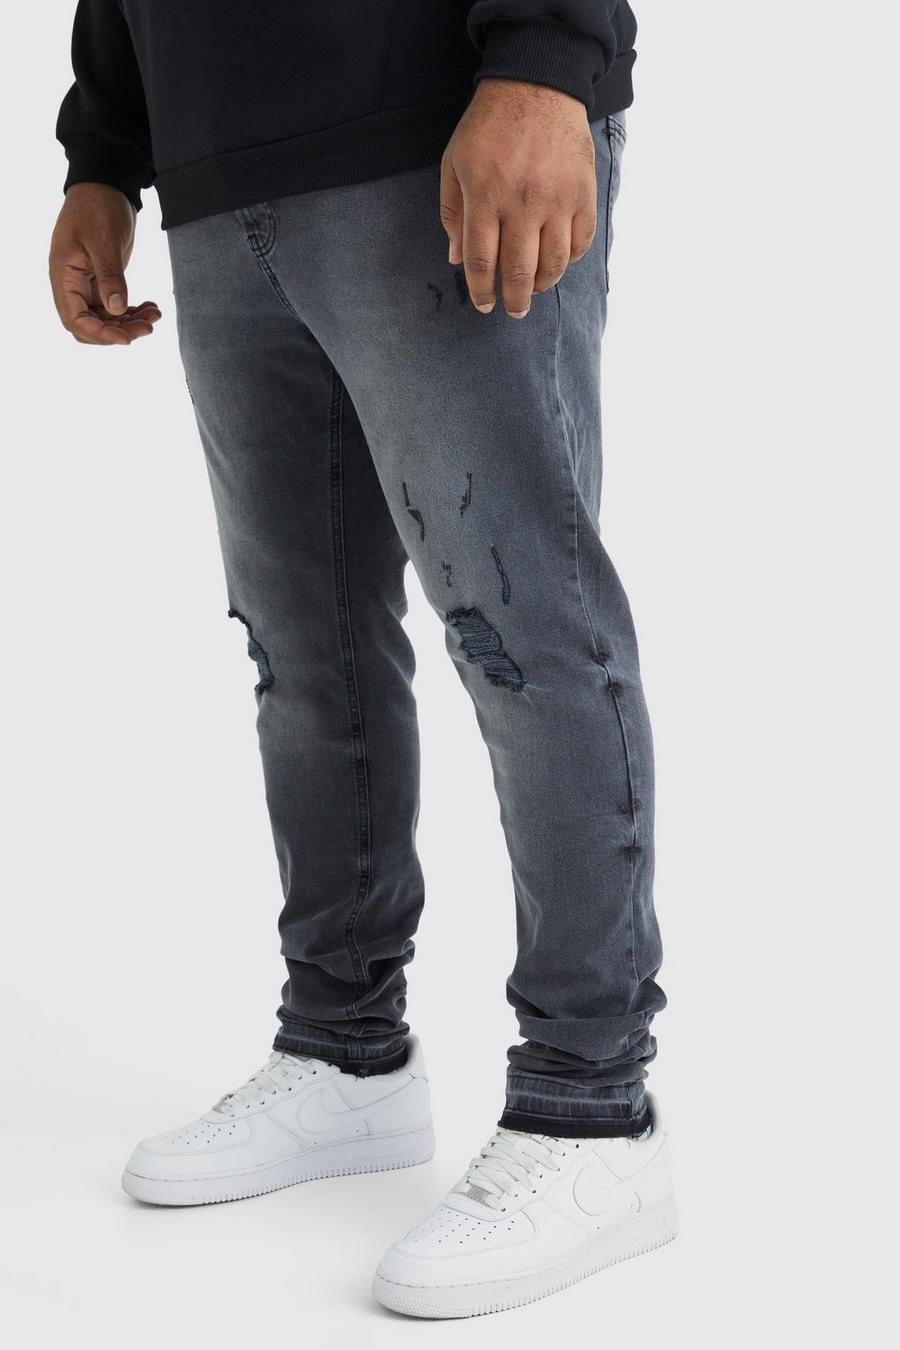 Charcoal Plus Skinny Stacked Distressed Ripped Let Down Hem Jean